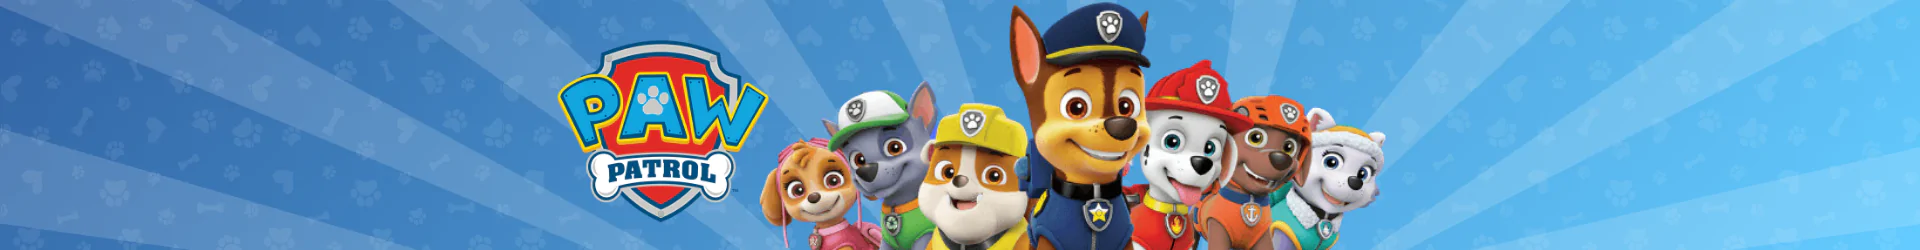 PAW Patrol products banner